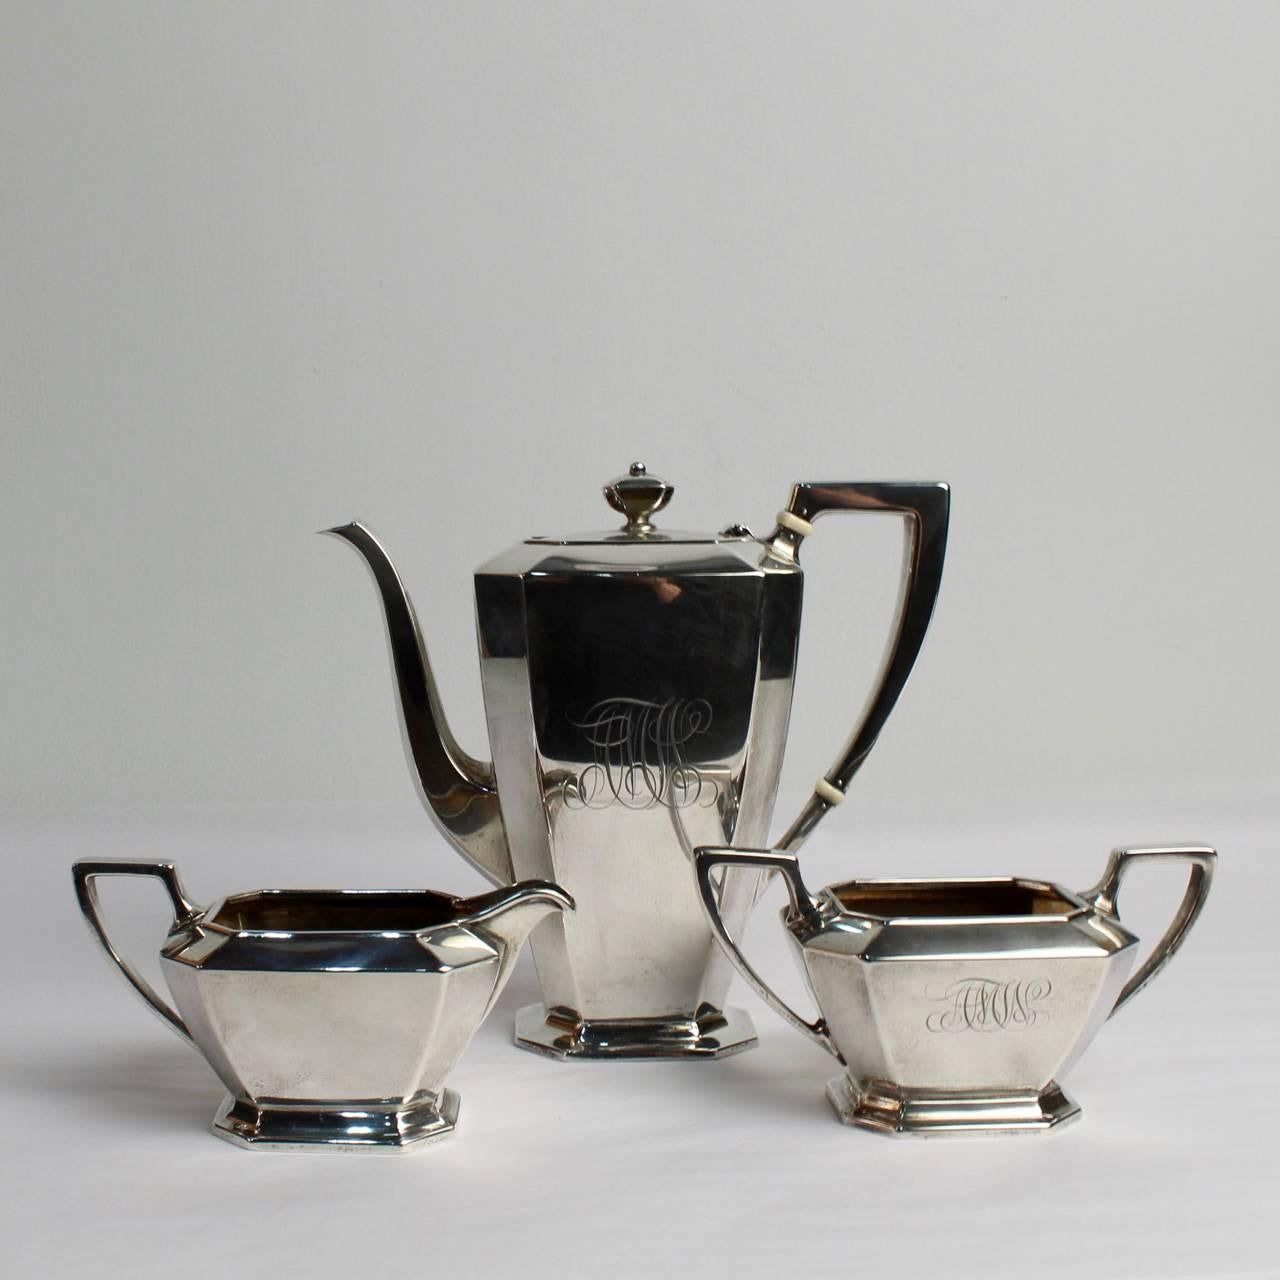 An antique Gorham Fairfax pattern sterling silver tea set consisting of a teapot, a creamer and a sugar bowl. 

Bases are marked for Gorham, sterling silver, and with the Fairfax pattern name.
  
Measurements:
Teapot height ca. 7 1/2 in.